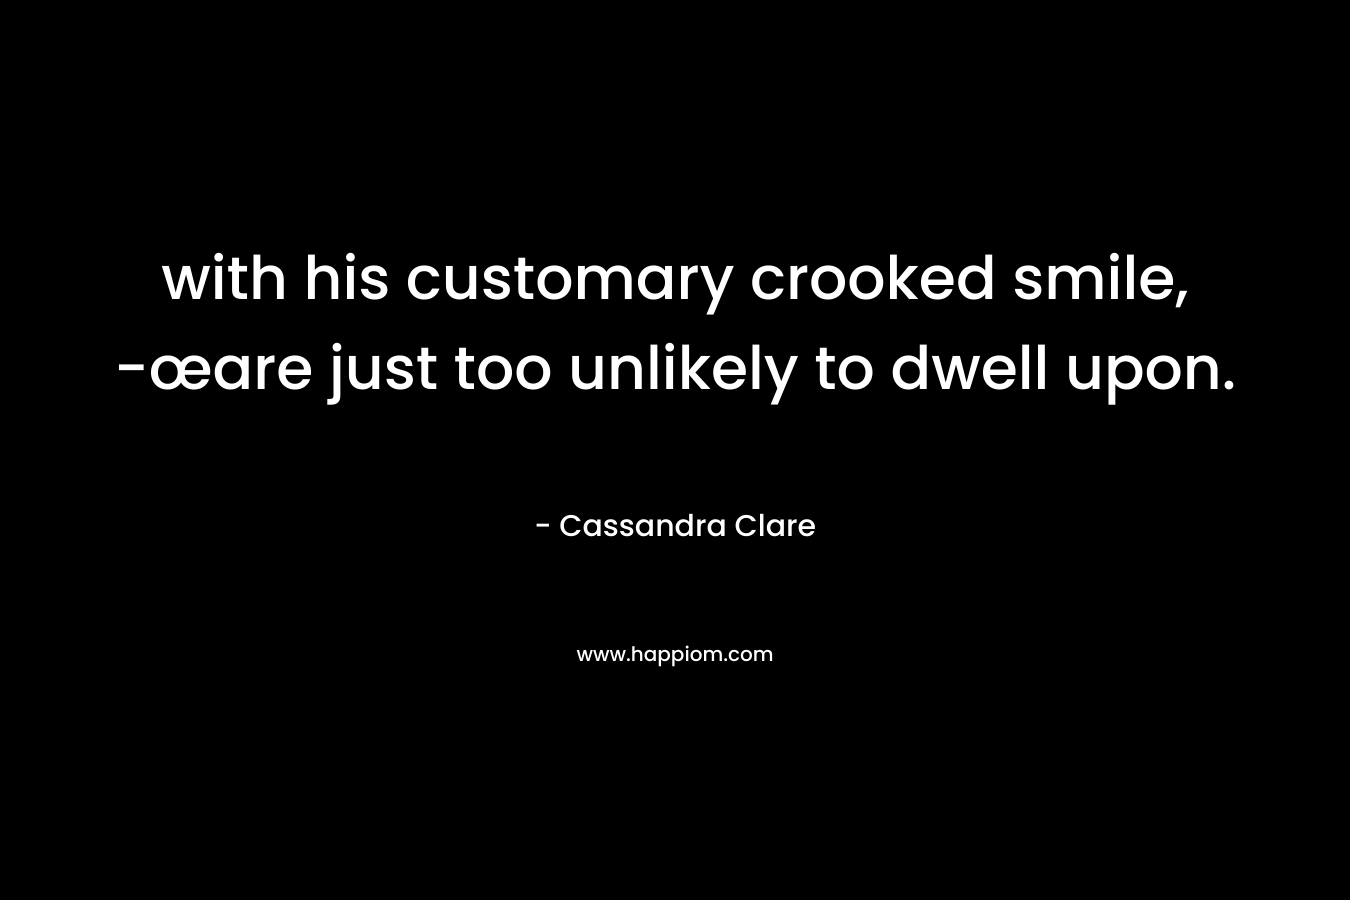 with his customary crooked smile, -œare just too unlikely to dwell upon. – Cassandra Clare